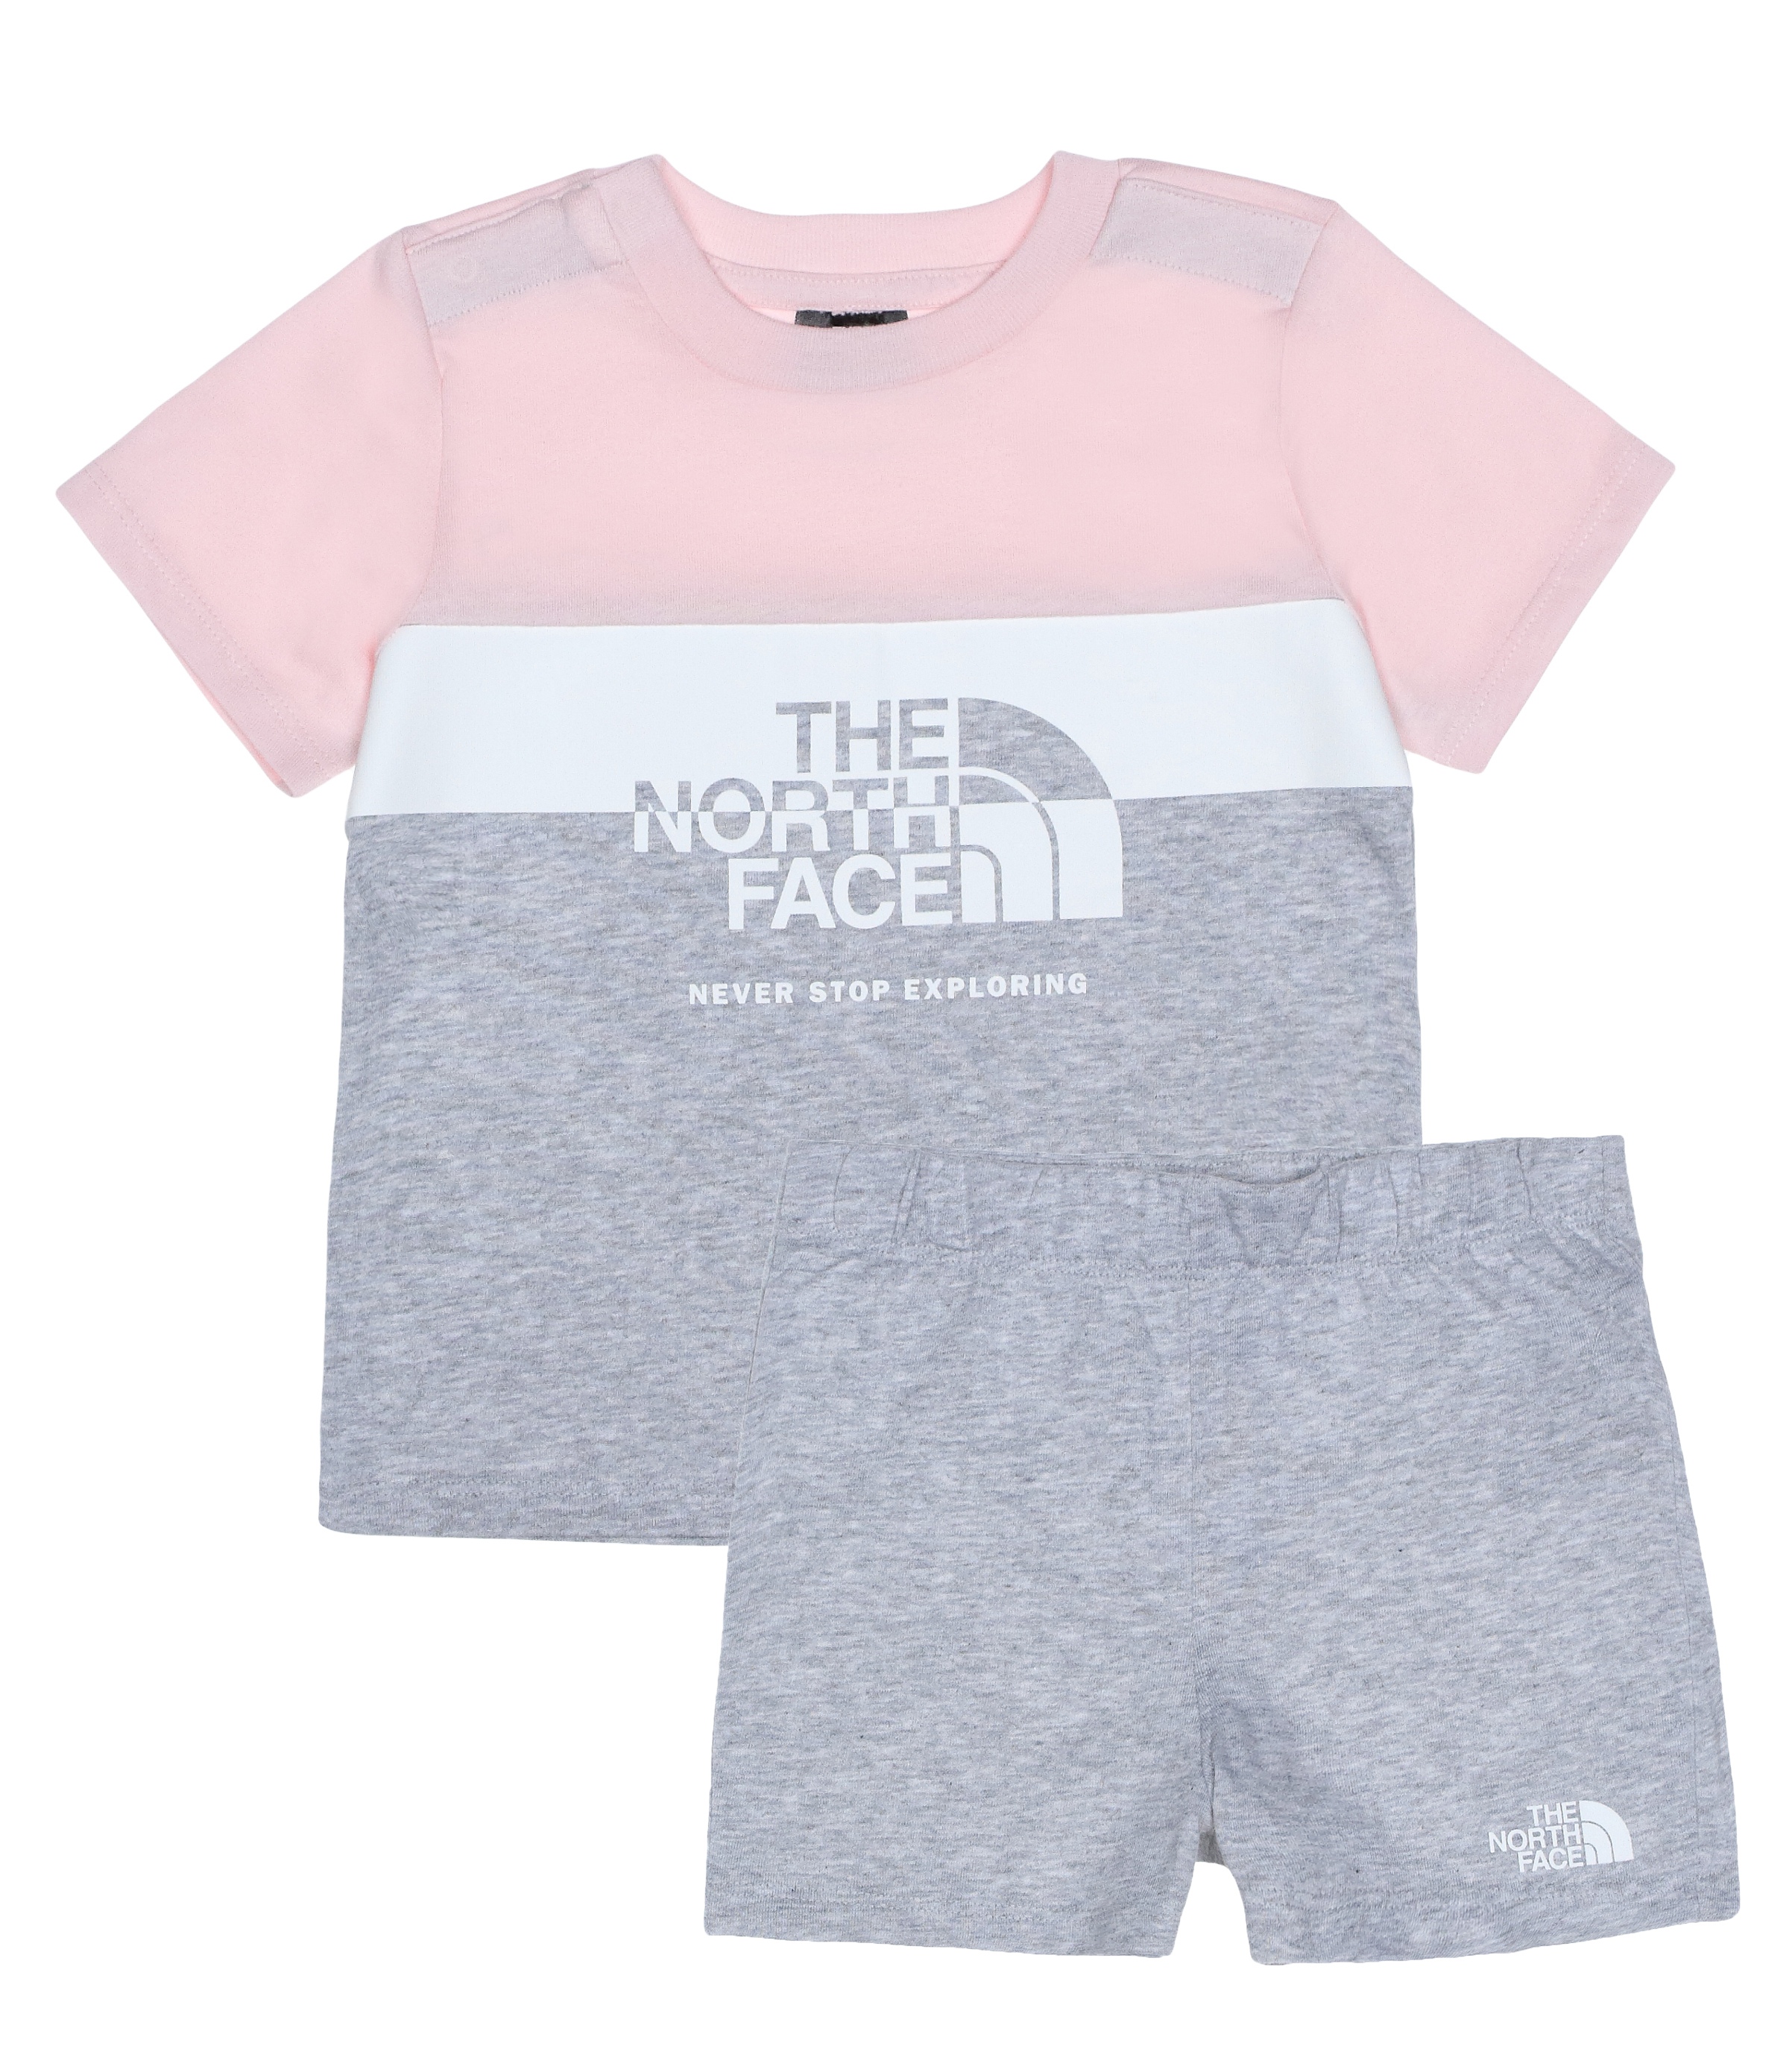 https://www.leadermode.com/234752/the-north-face-baby-summer-set-purdy-pink.jpg